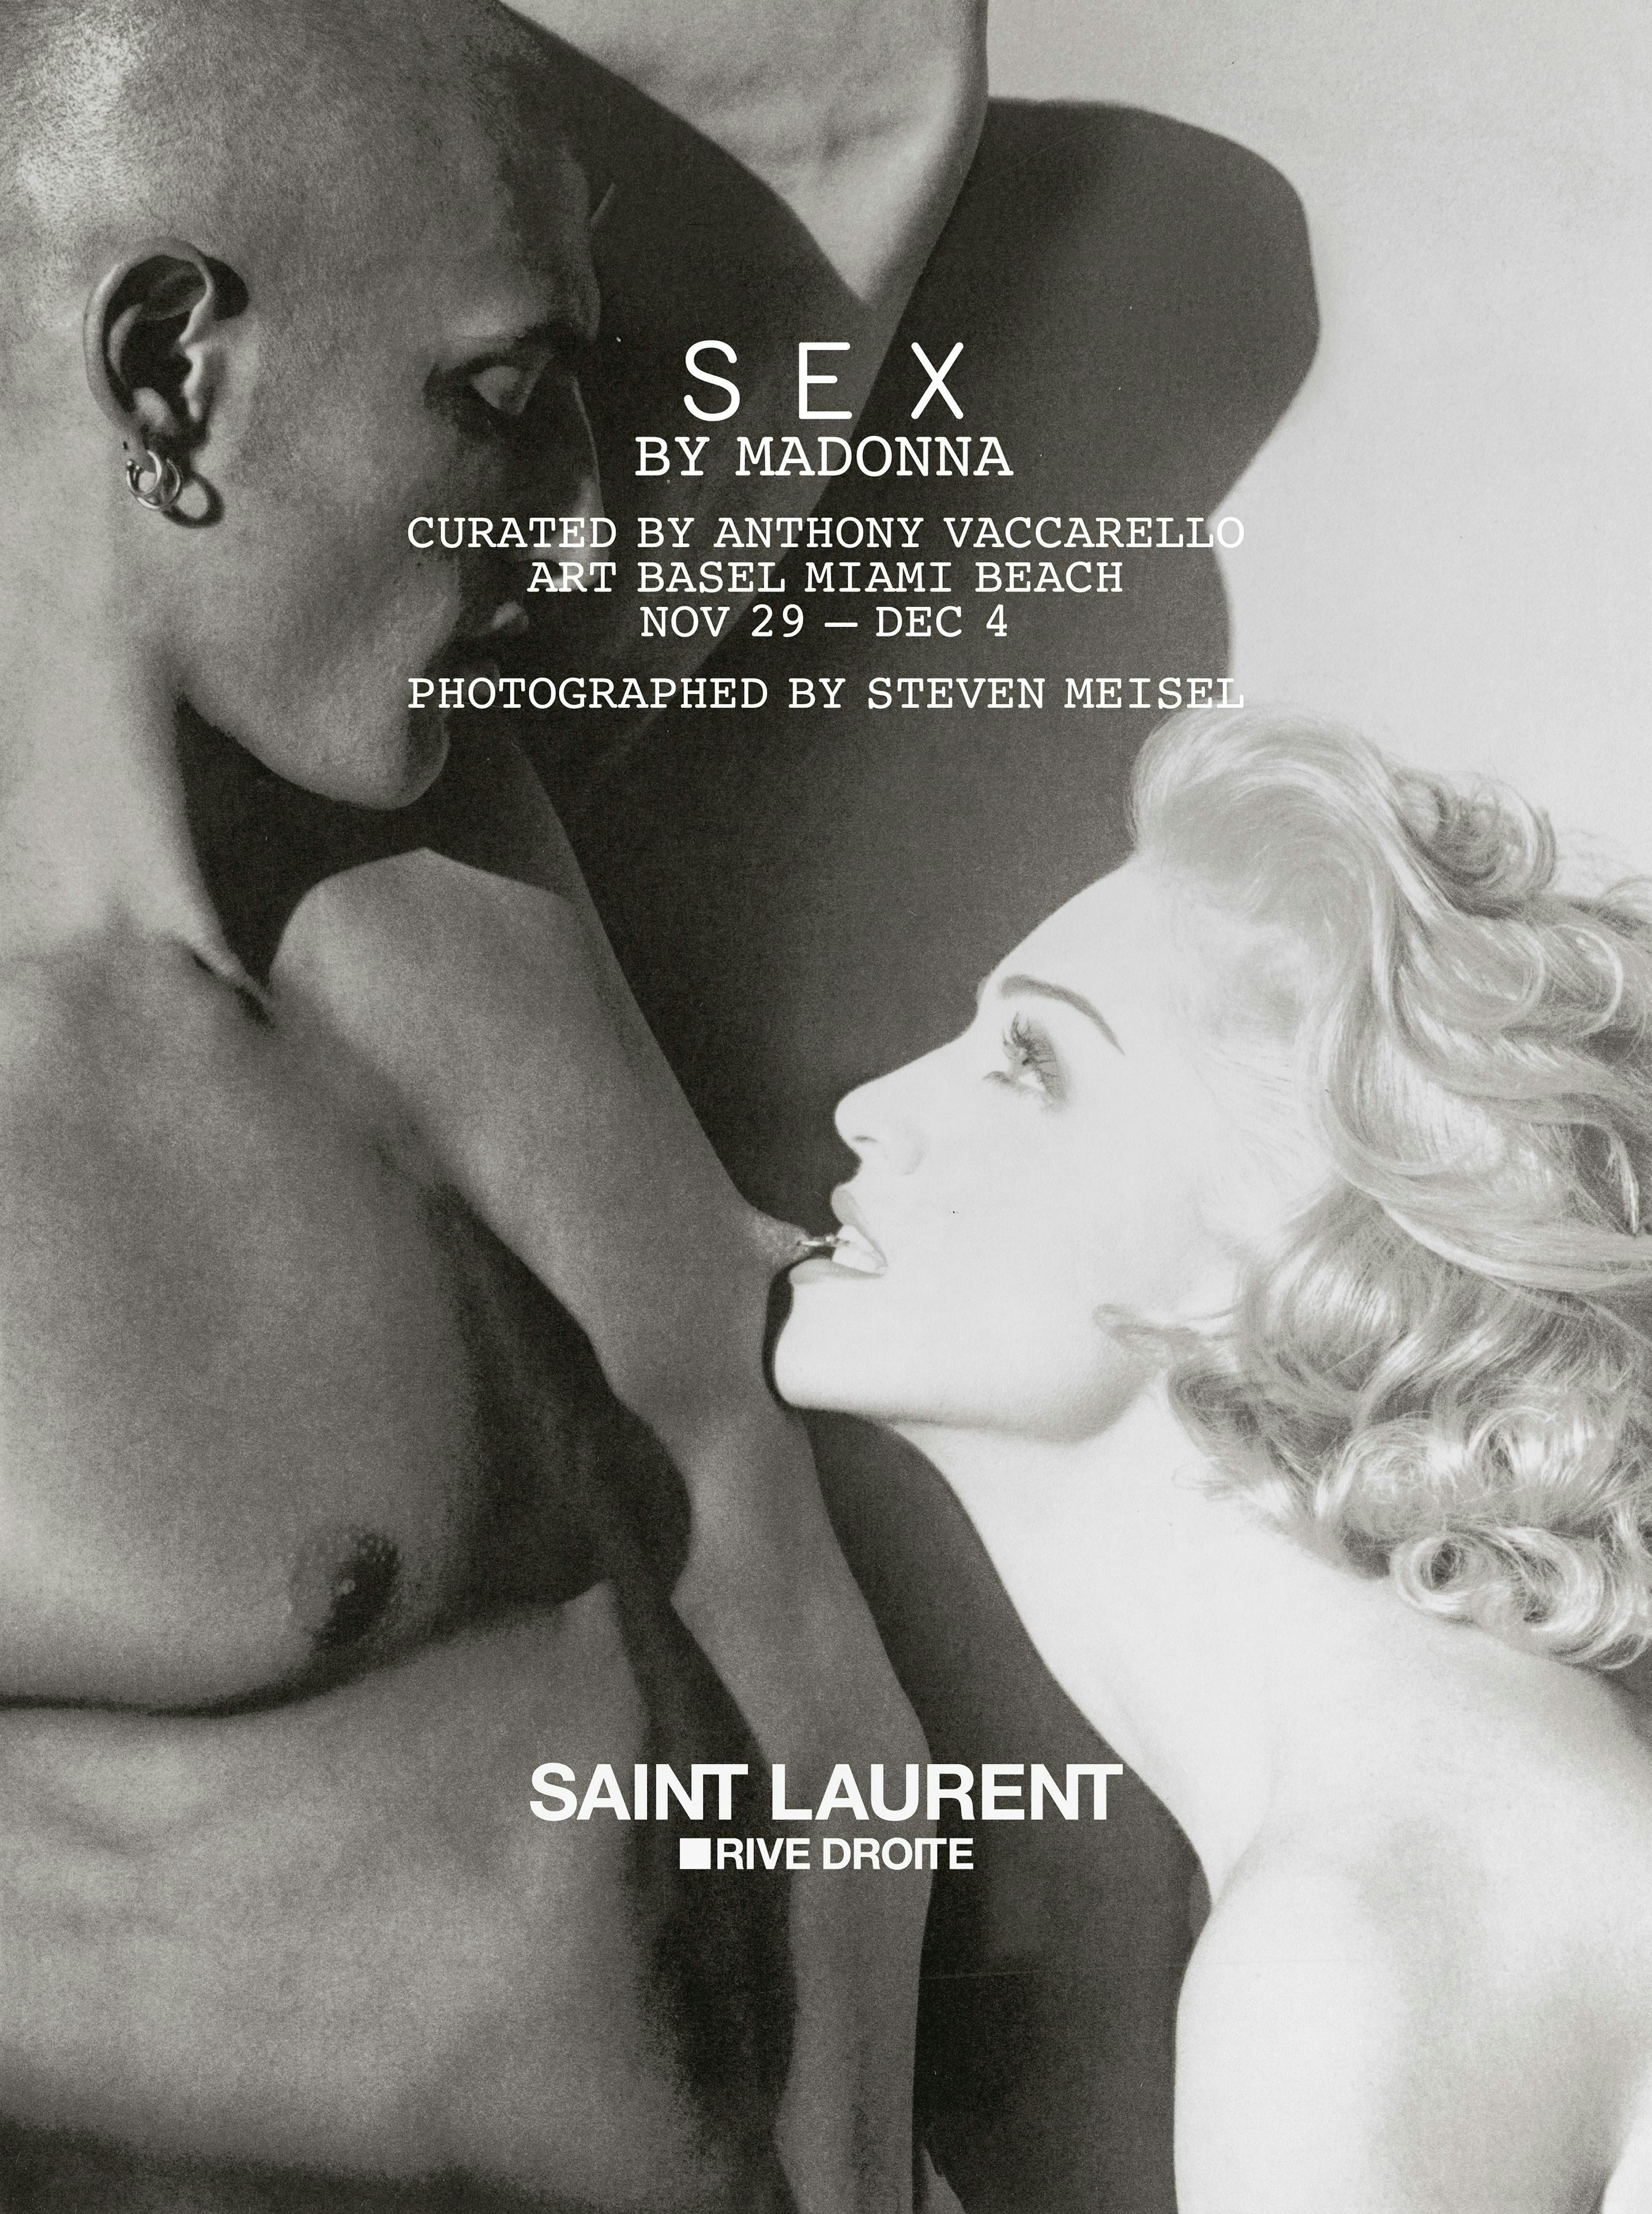 Presenting Sex by Madonna at Saint Laurent Rive Droite in Miami